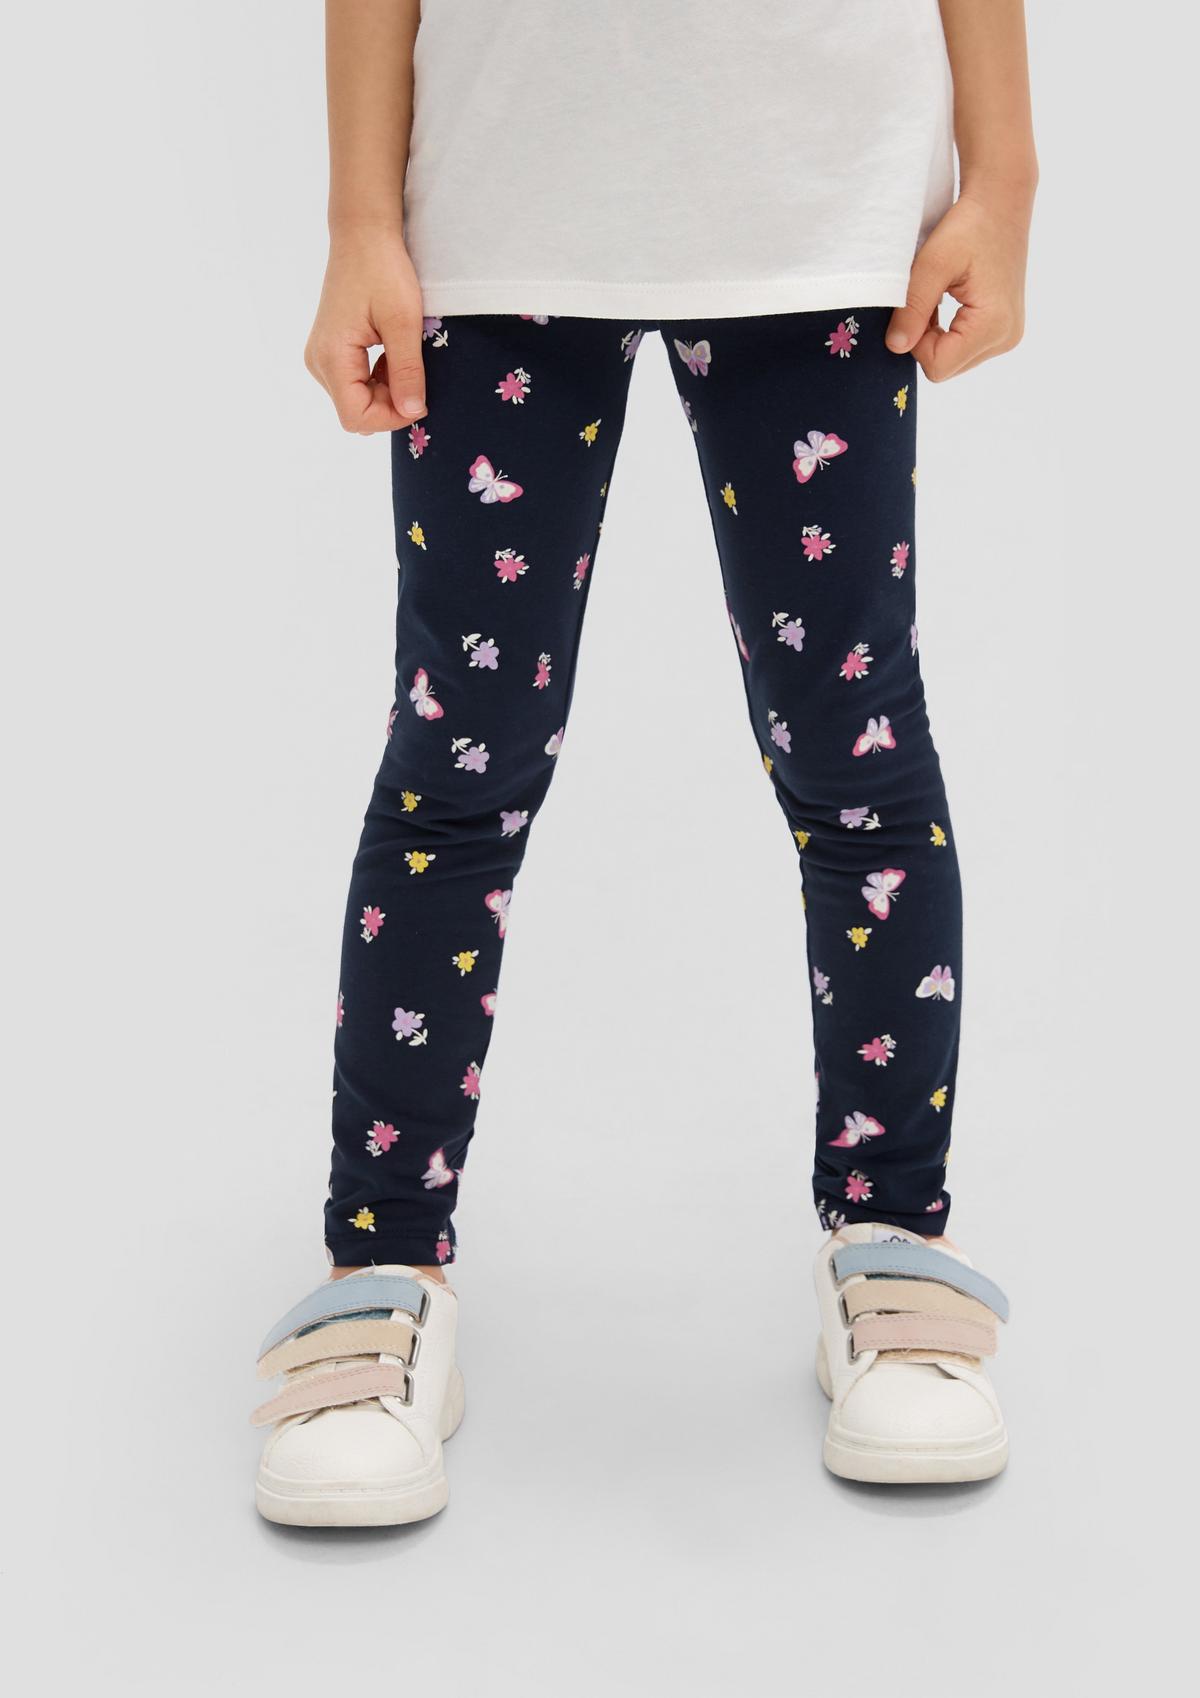 Leggings with an all-over print